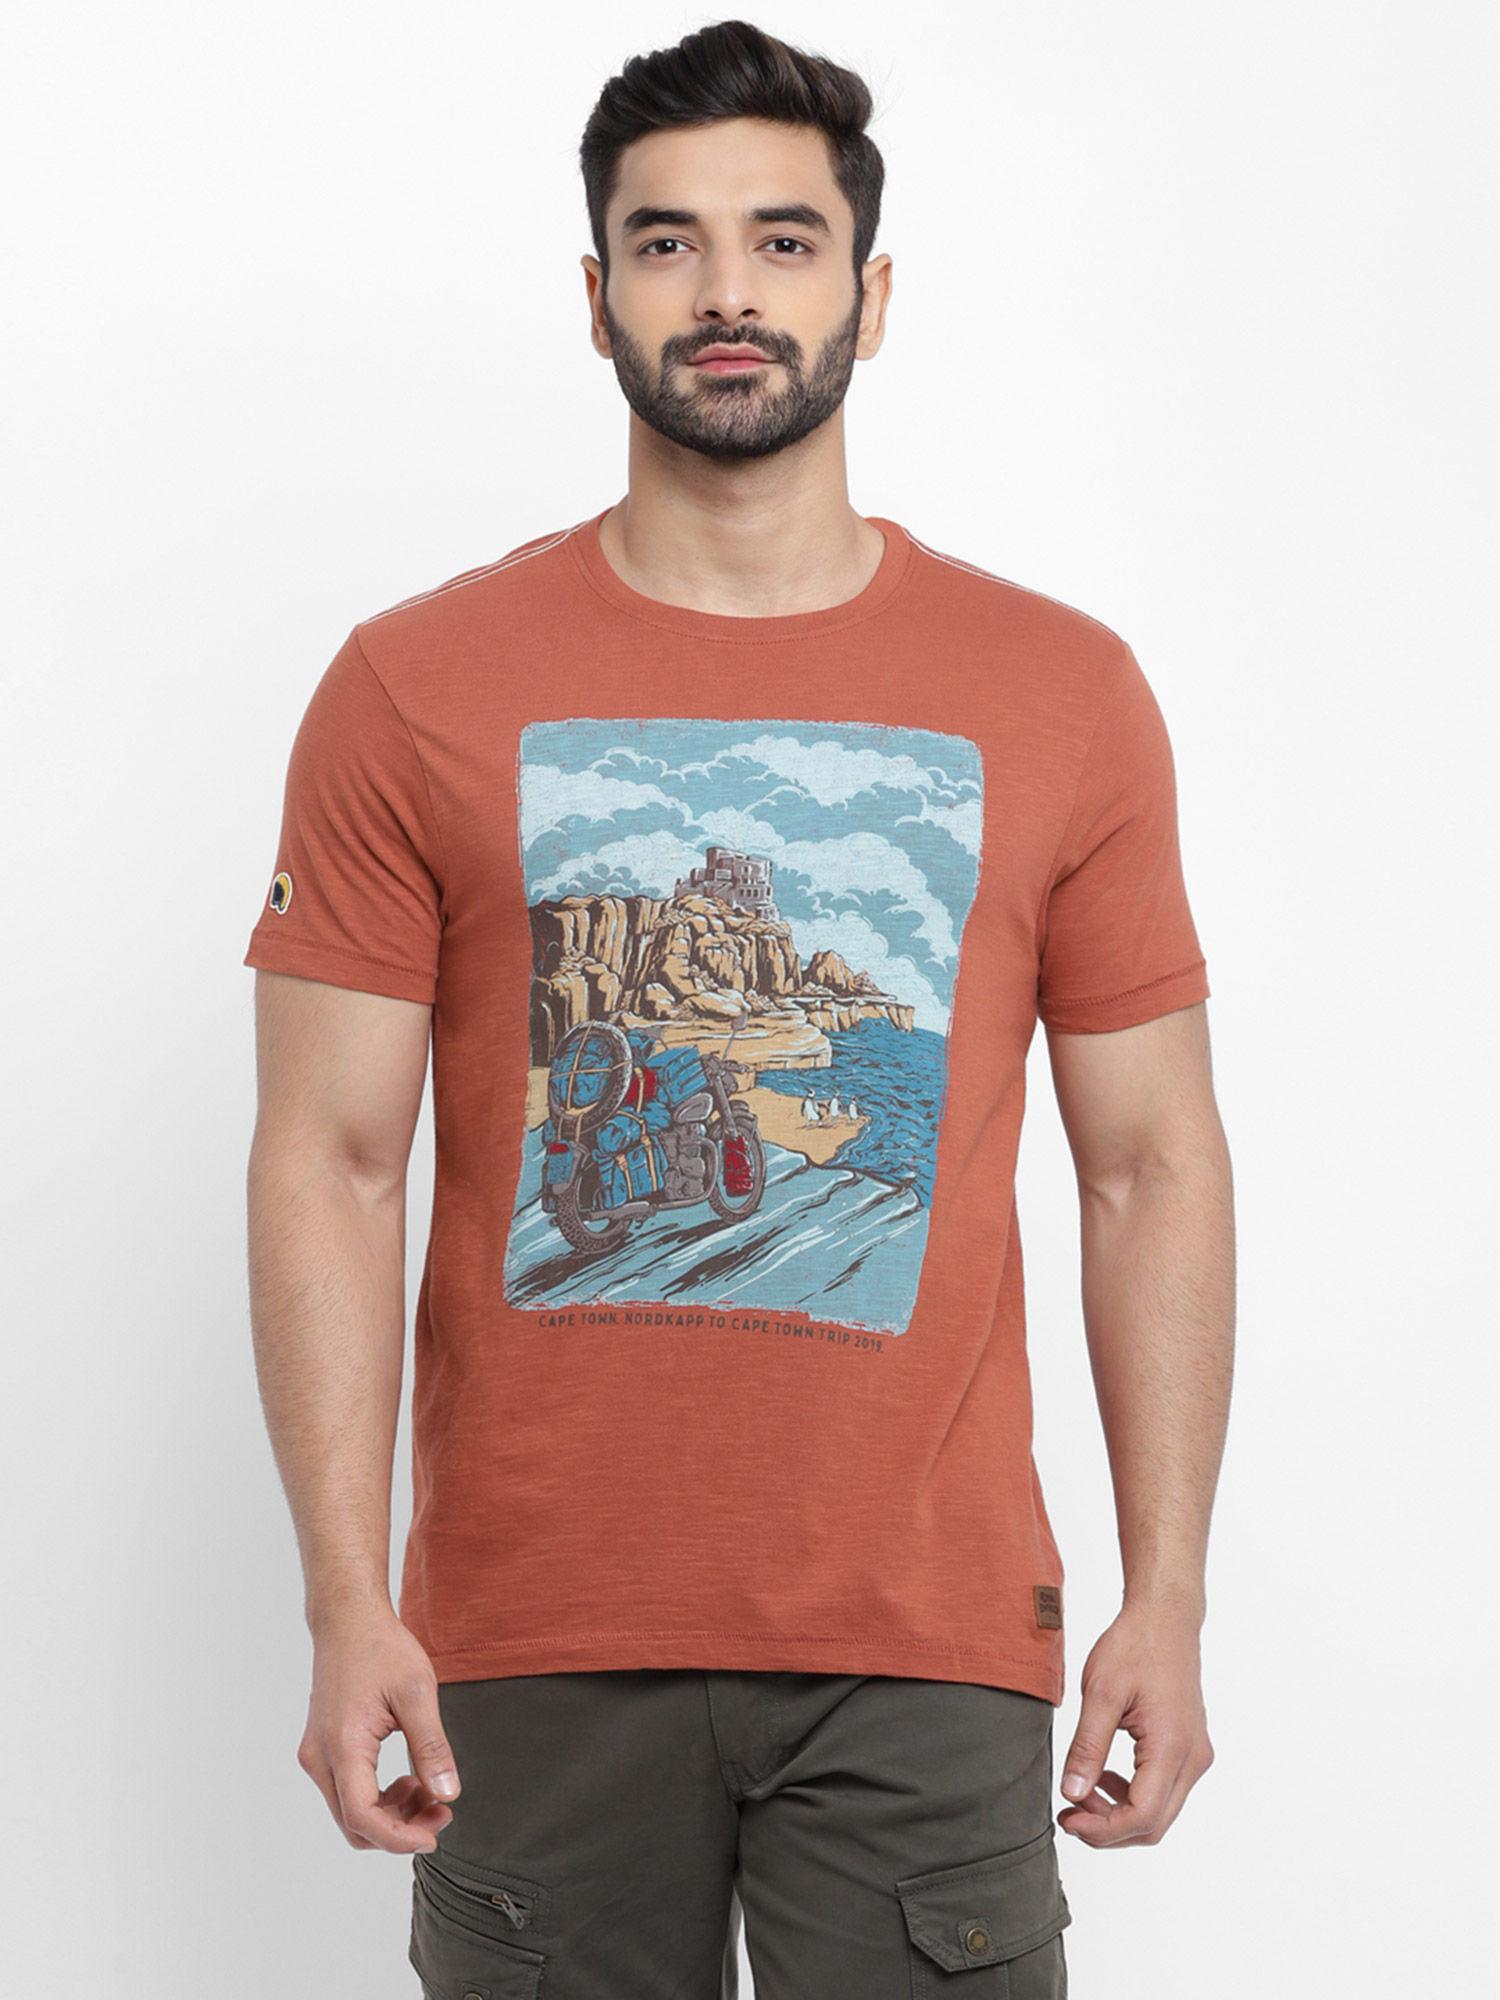 nord kapp to cape town t-shirt